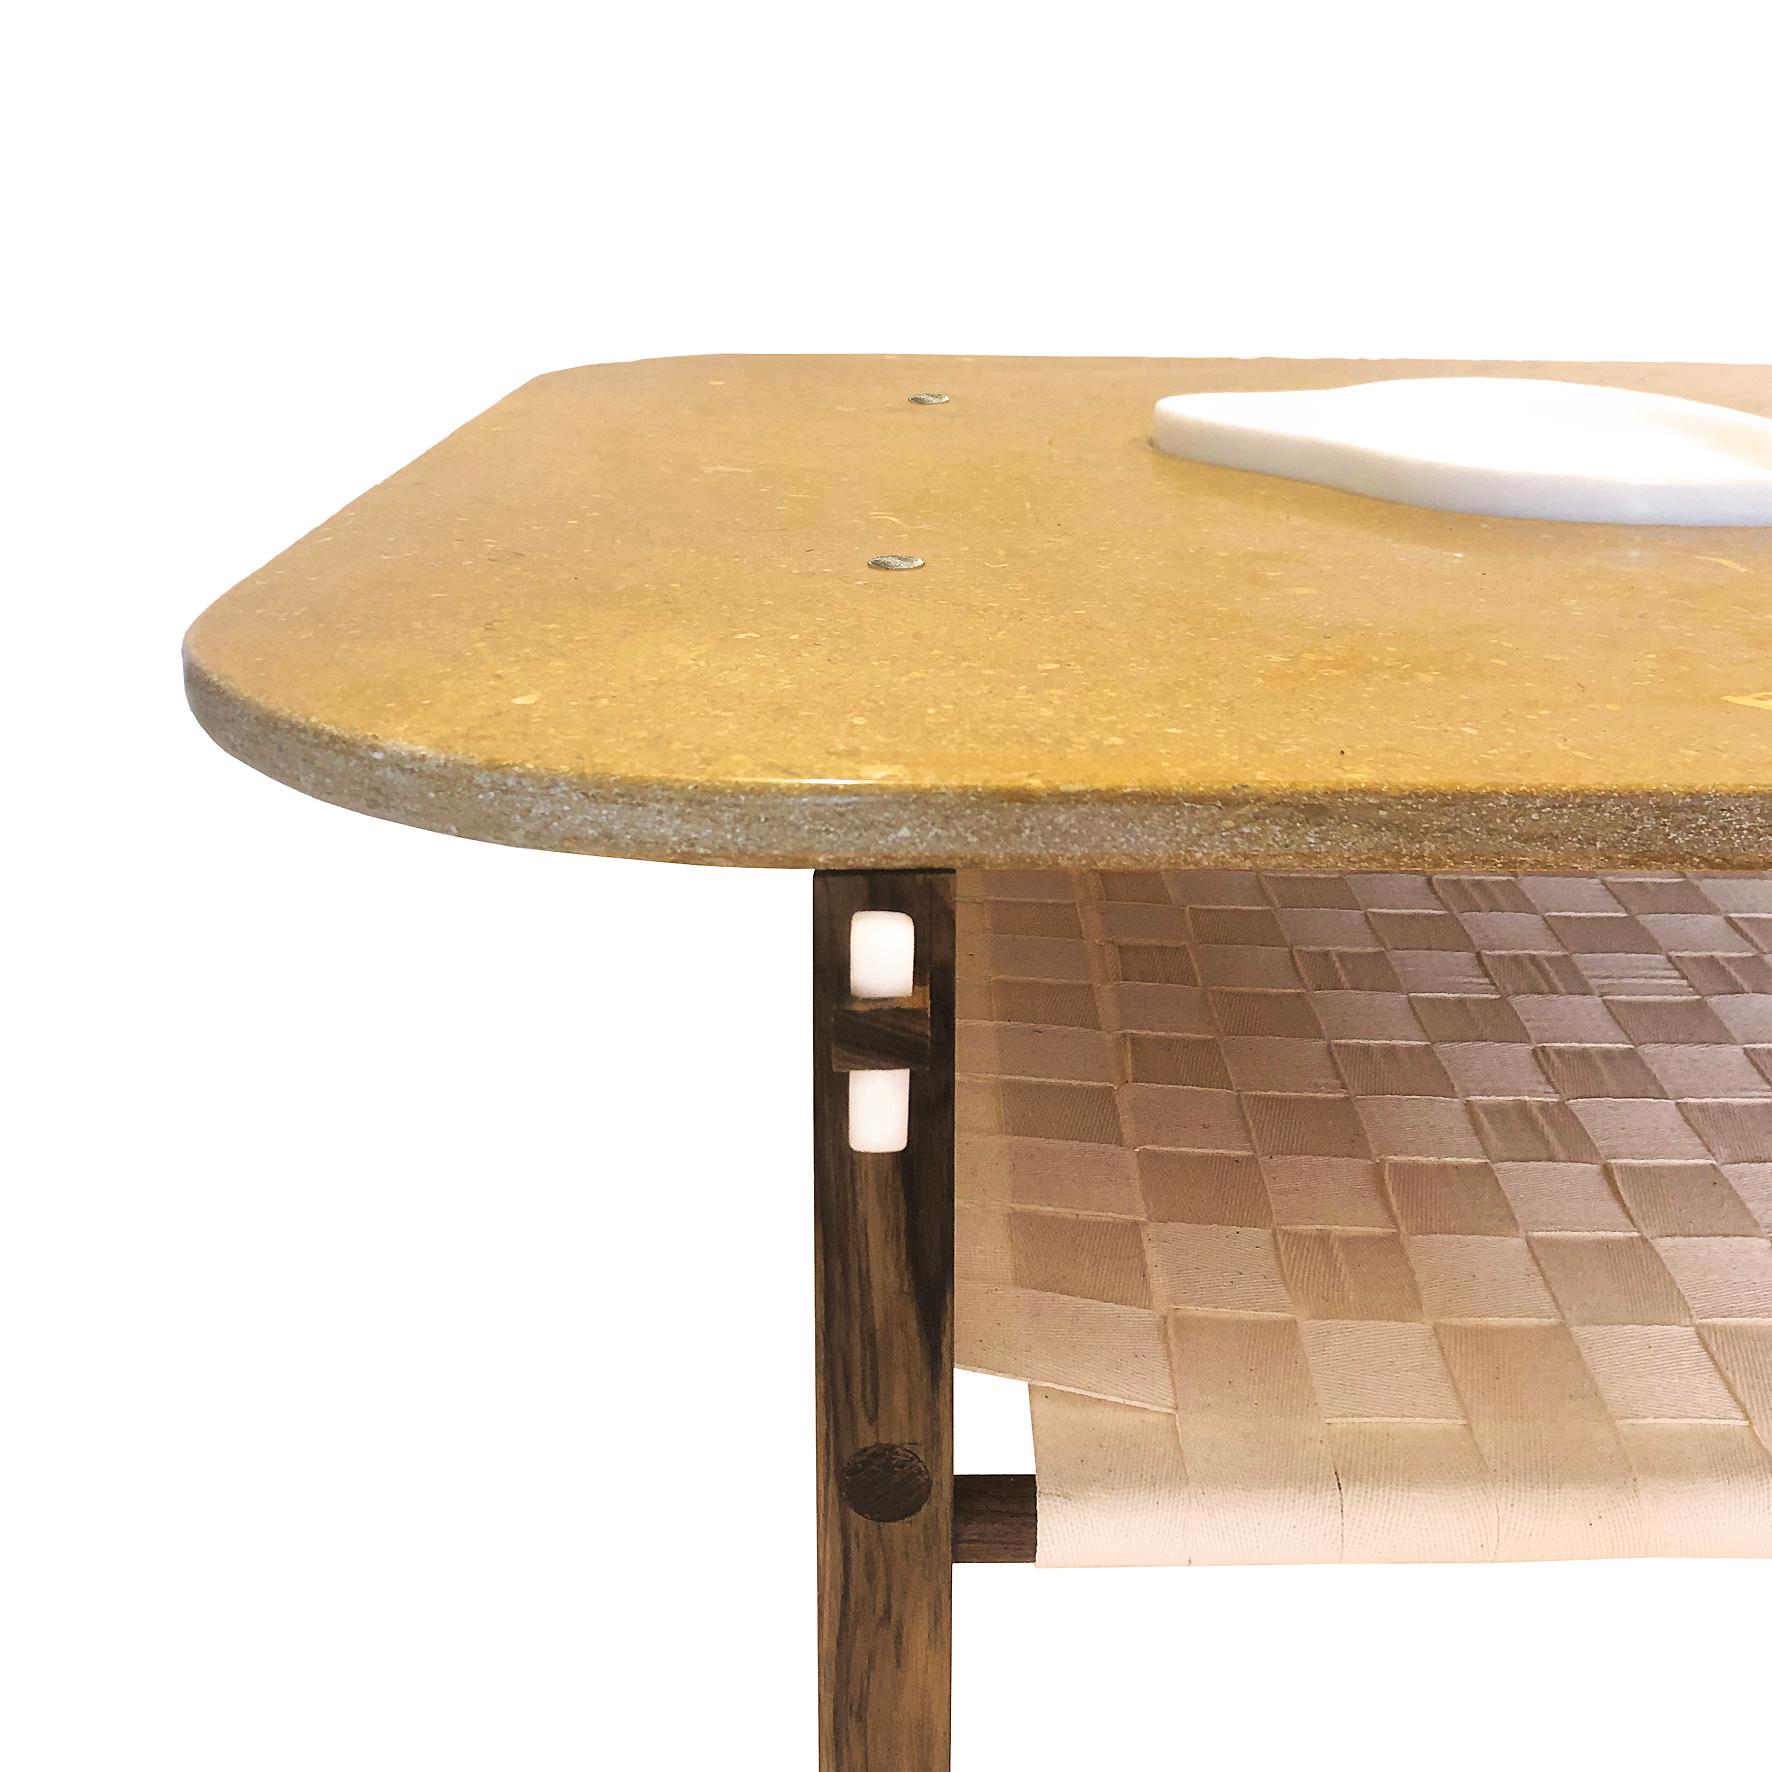 A marble and wood coffee table

With a curved yellow Jaisalmer marble top supporting a mobile embedded marble tray.
Supported with a square walnut frame joined to the four with keys made of white Makrana marble.
With a lower tier woven with